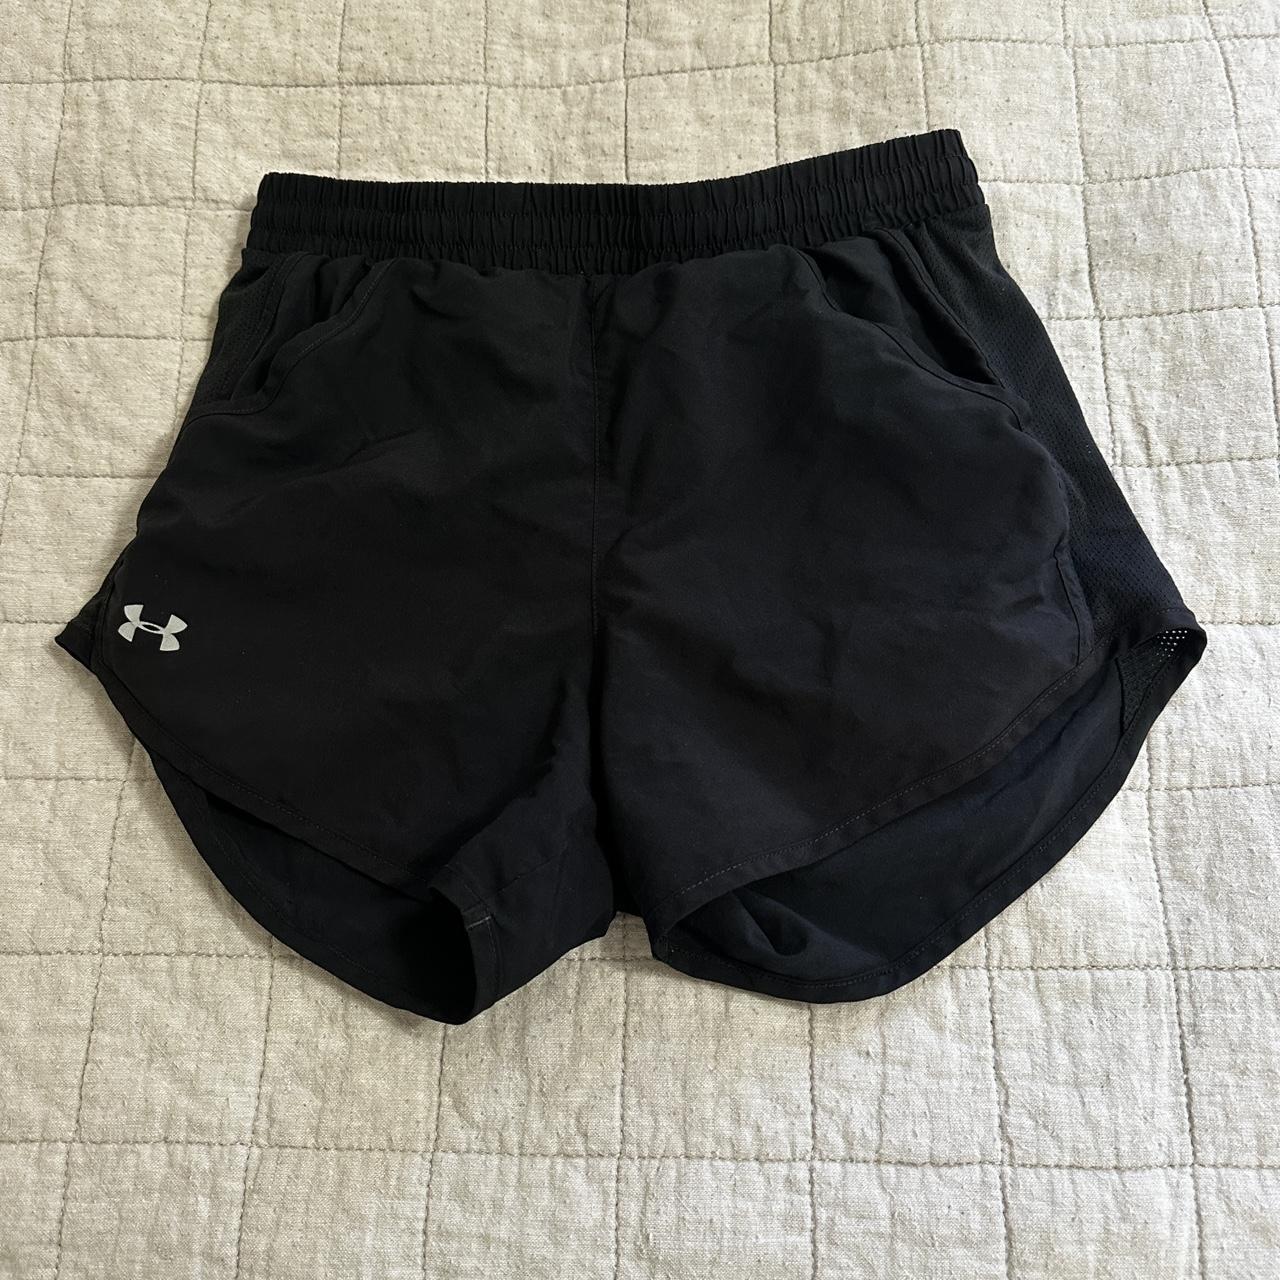 Under Armour Athletic Women's Shorts Extra Small